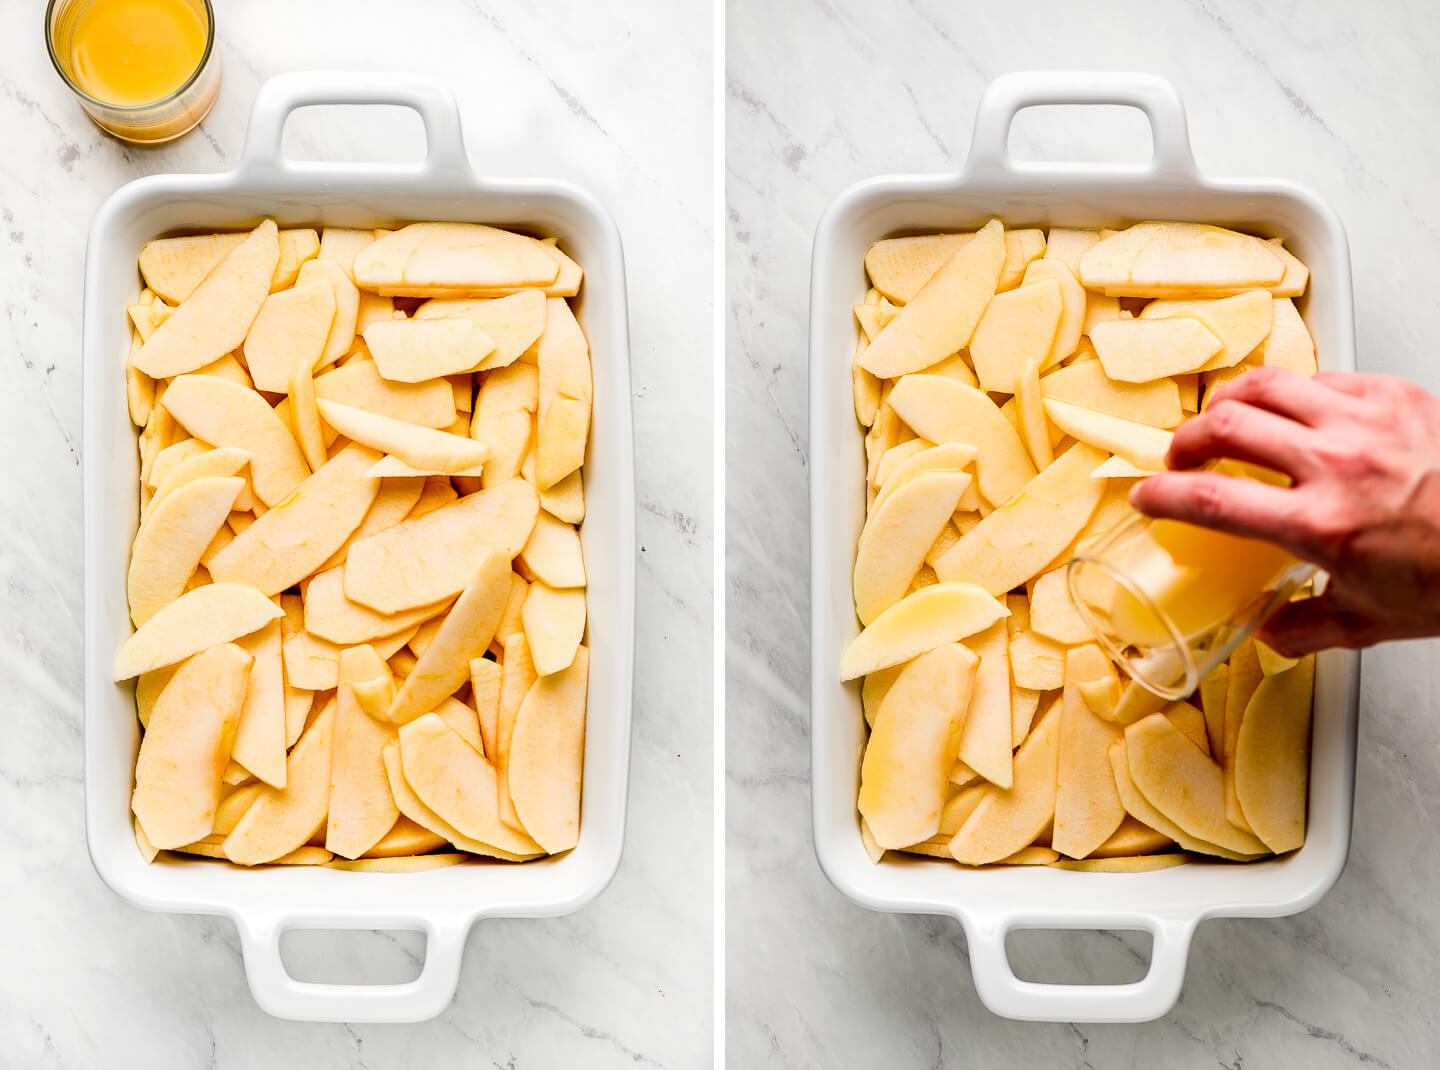 Diptych- A baking dish with sliced apples and a glass of orange juice to the side; pouring the orange juice over the apples.